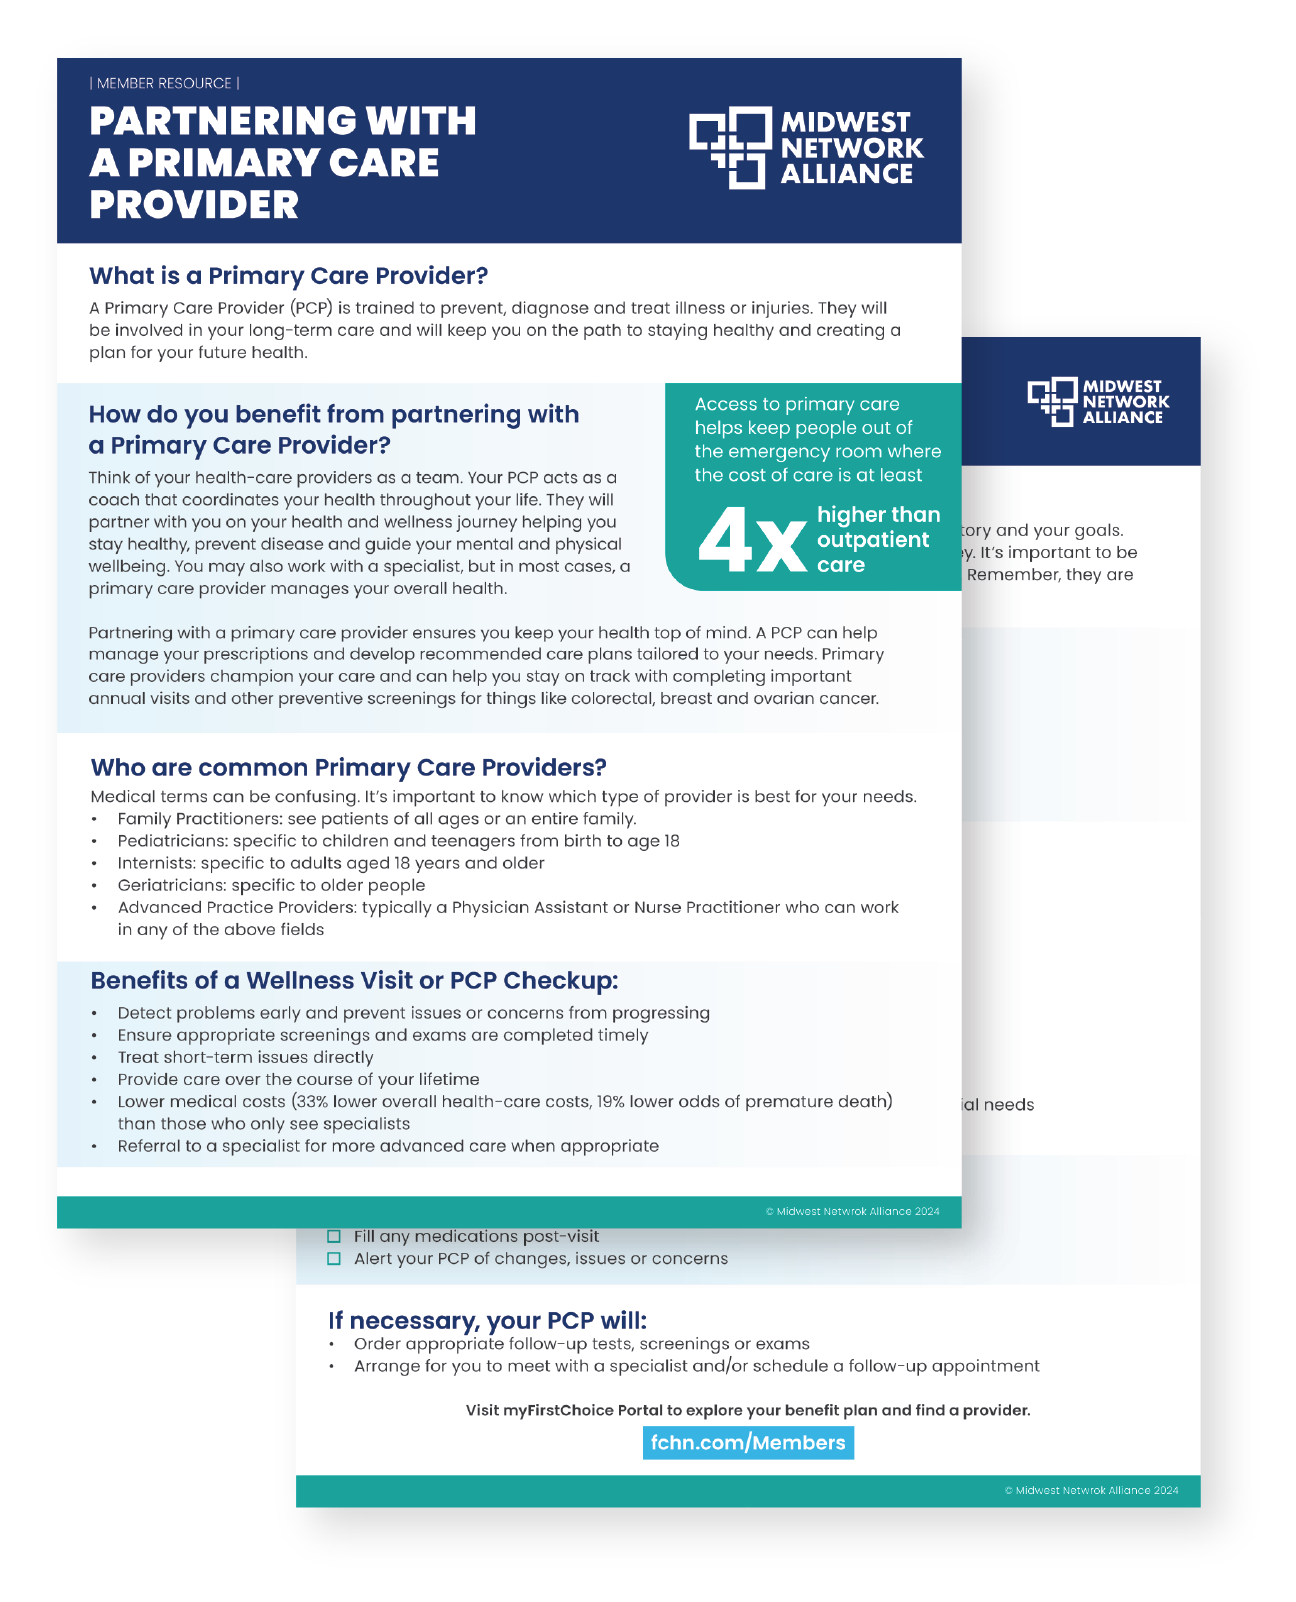 MNA_Primary Care Provider_Overview_Collateral